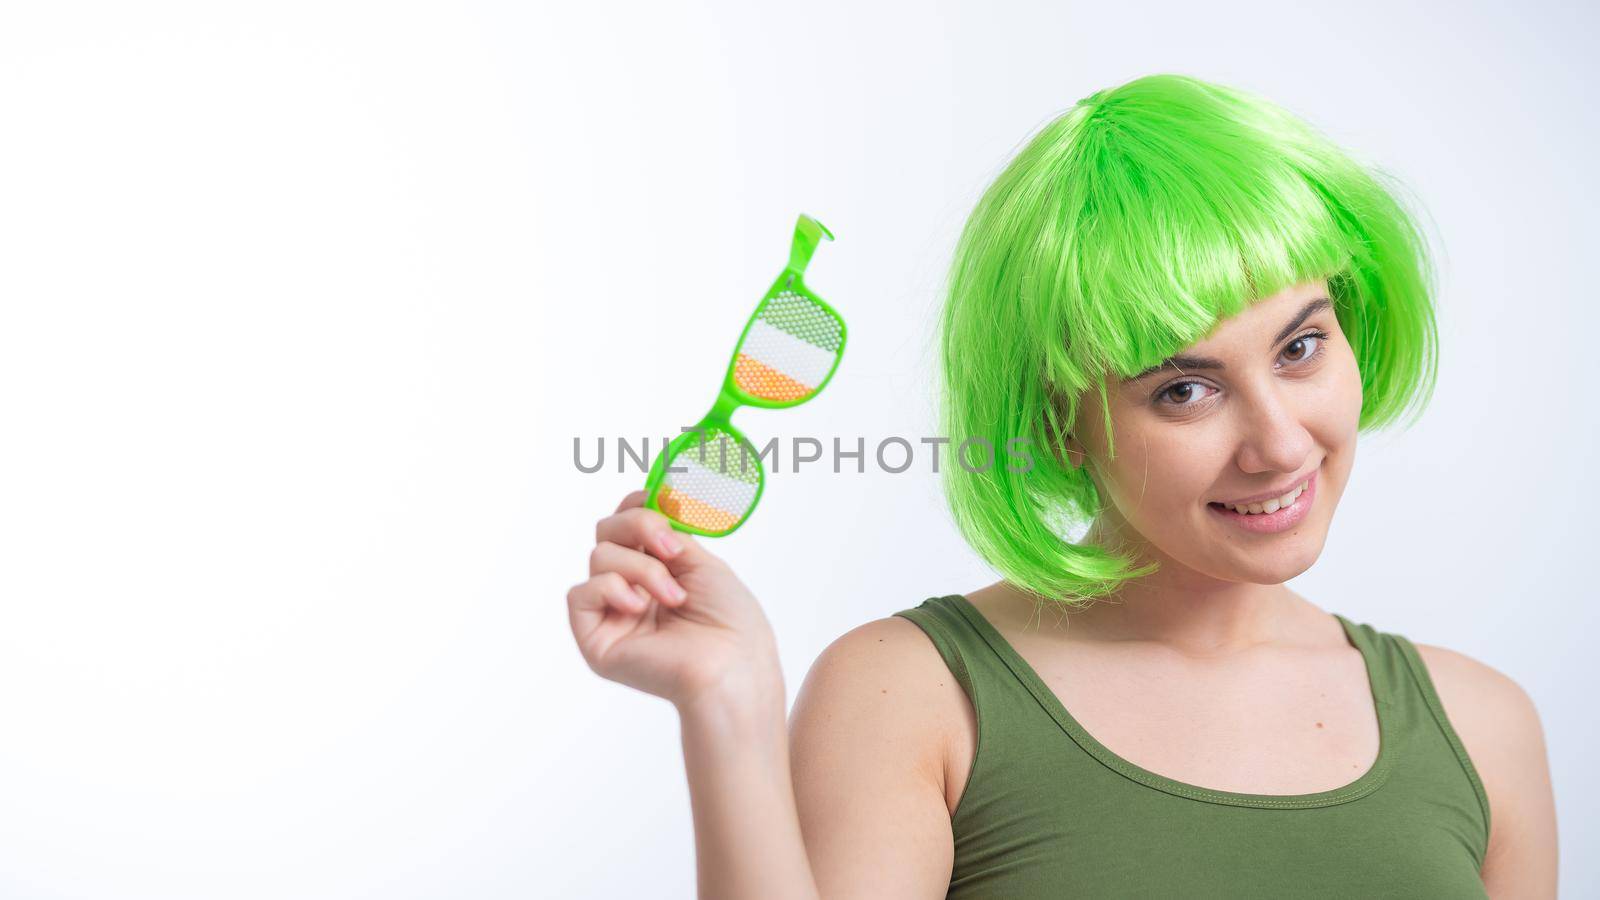 Cheerful young woman in green wig and funny glasses celebrating st patrick's day on a white background by mrwed54